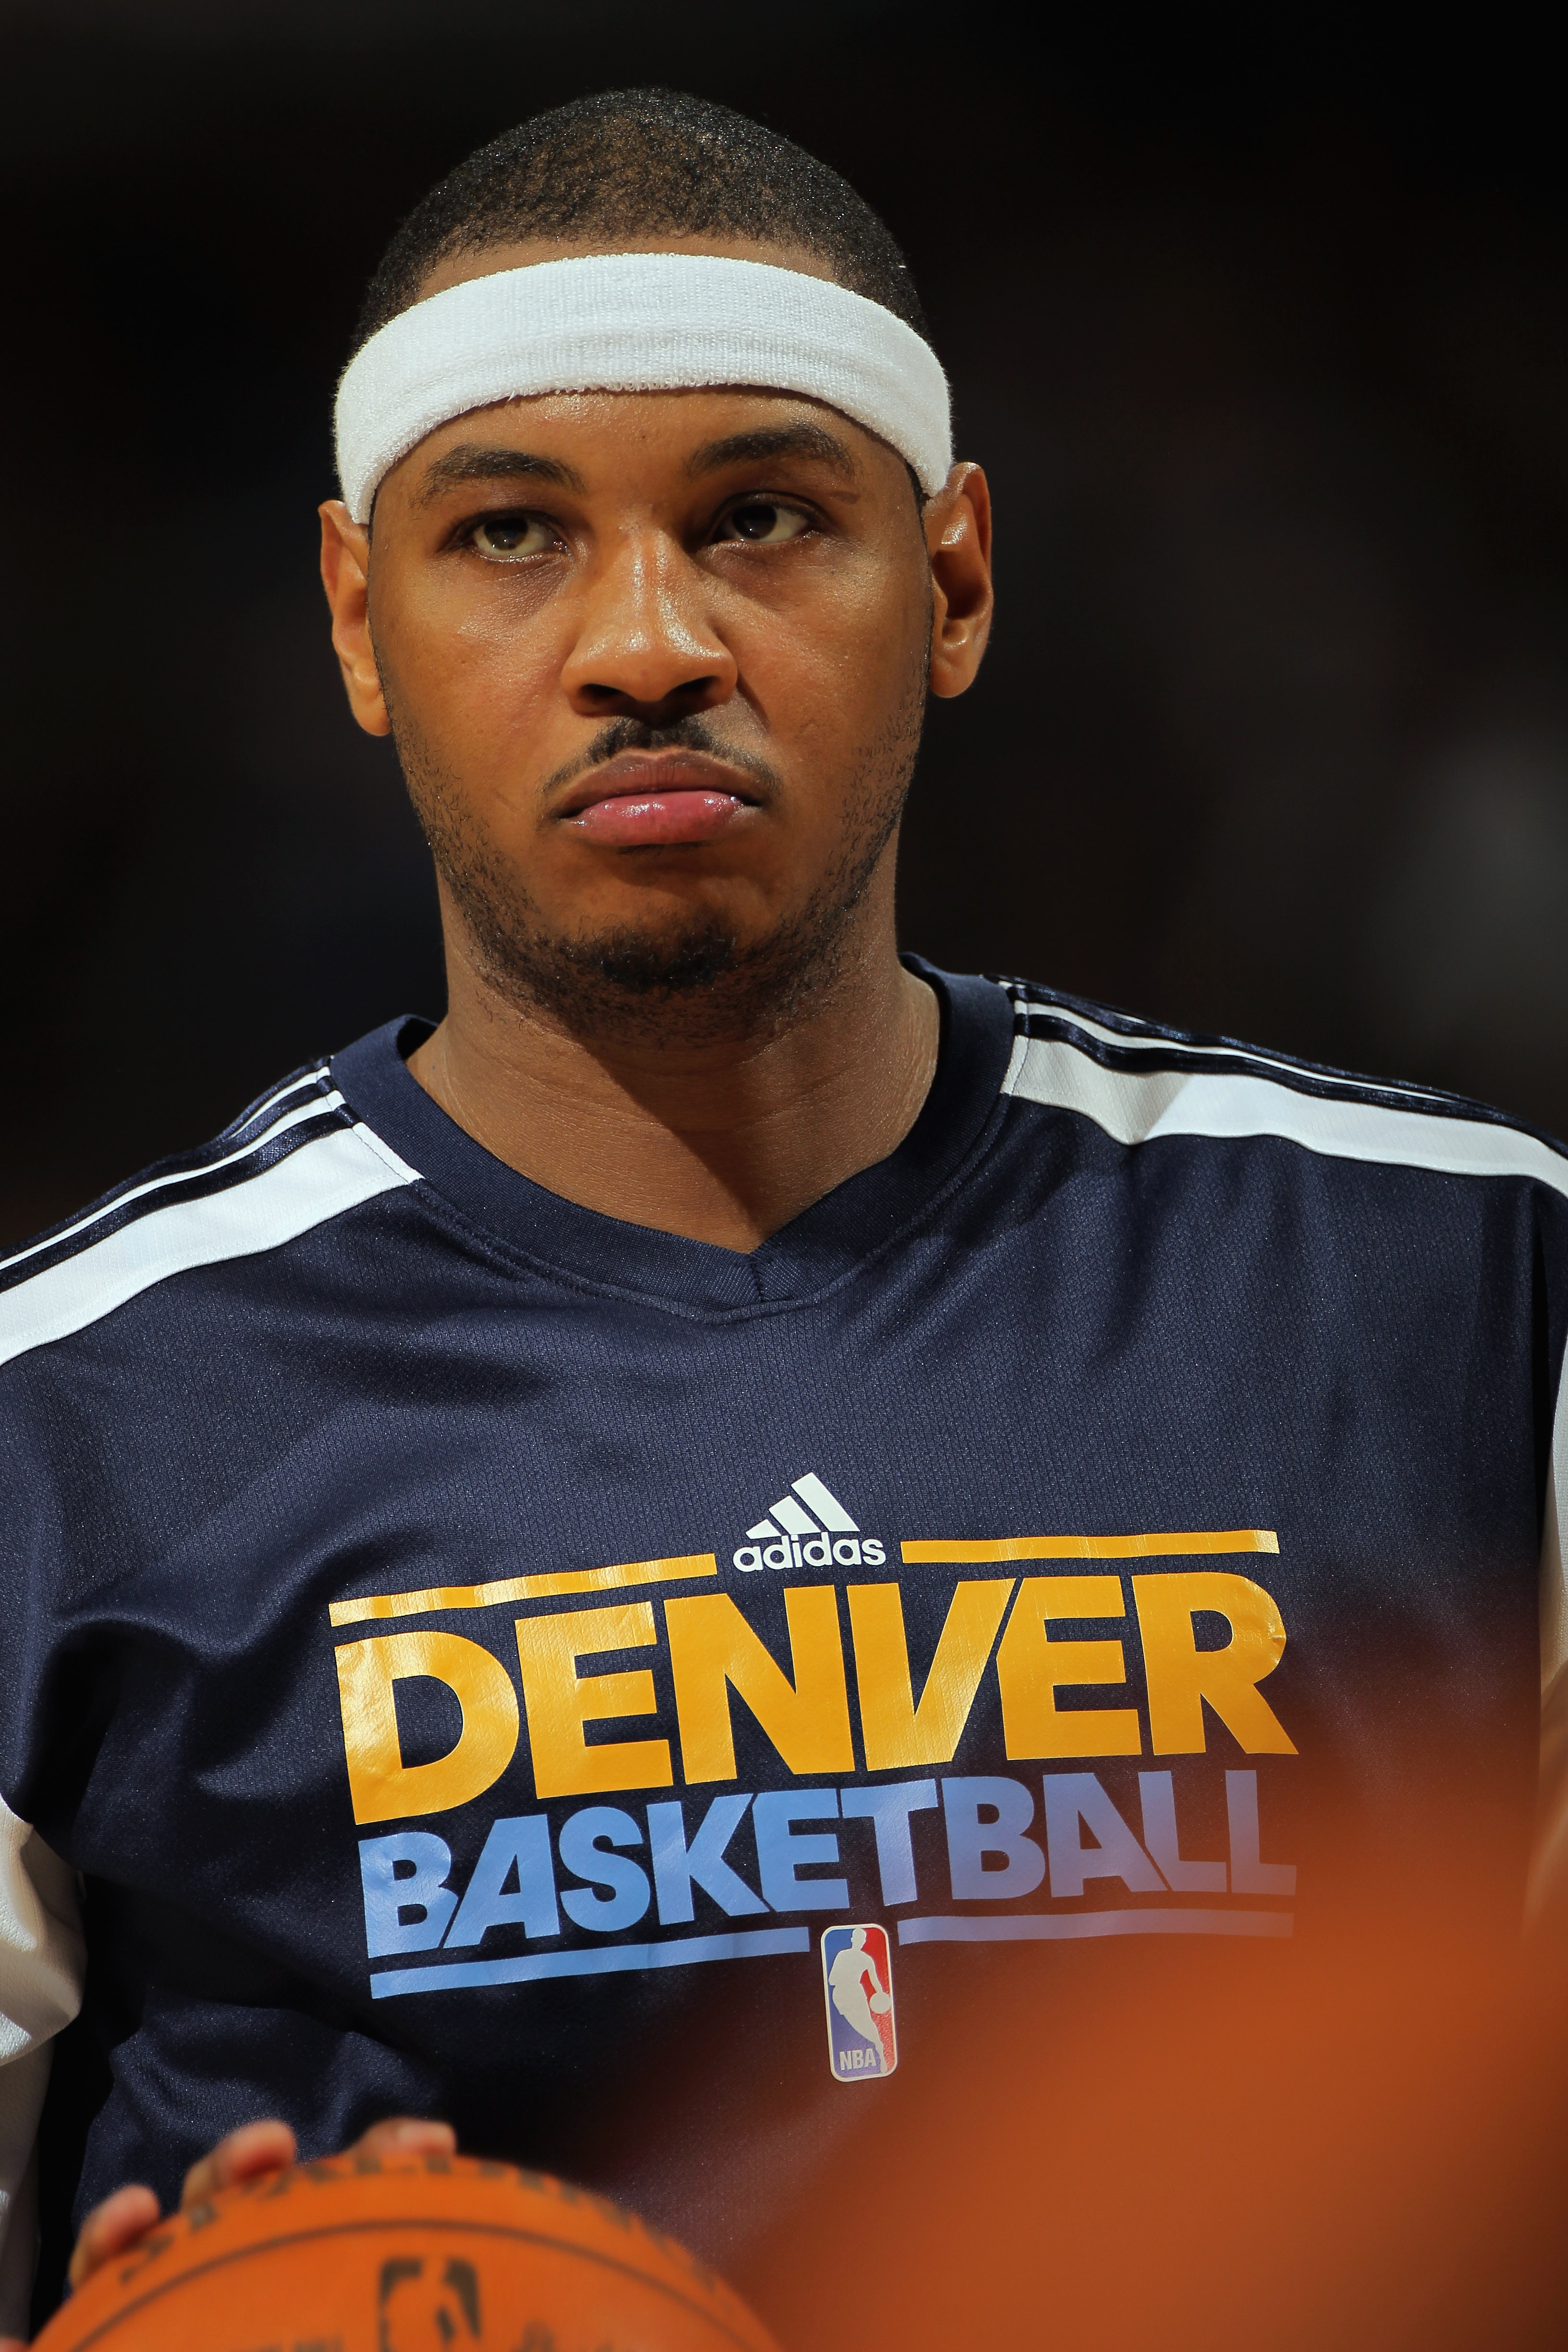 DENVER, CO - JANUARY 21:  Carmelo Anthony #15 of the Denver Nuggets looks on as he warms up for the second half against the Los Angeles Lakers at the Pepsi Center on January 21, 2011 in Denver, Colorado. The Lakers defeated the Nuggets 107-97. NOTE TO USE